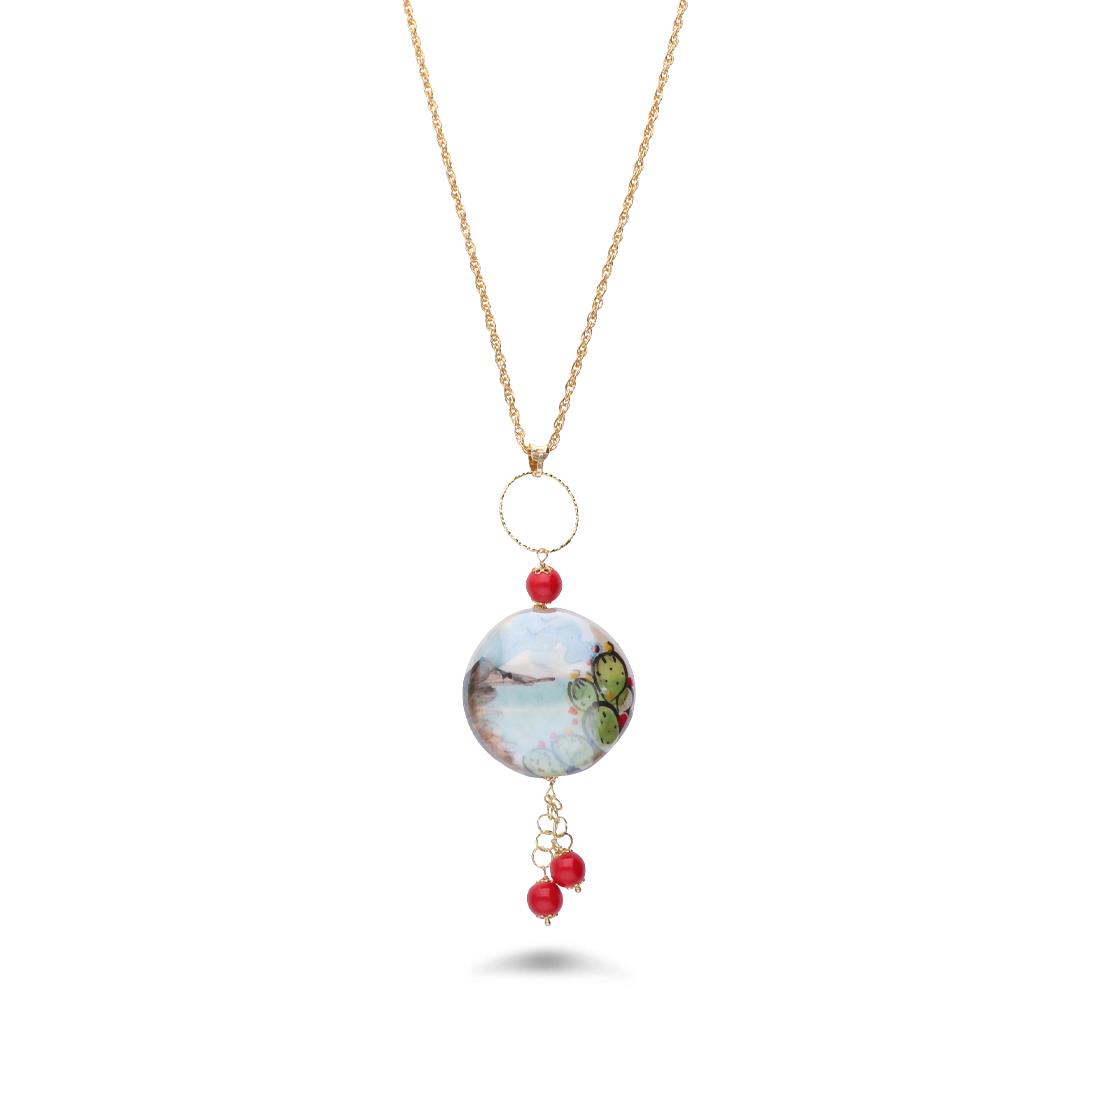 Silver necklace with hand painted ceramic with mountain - LE PERLE DI CALTAGIRONE